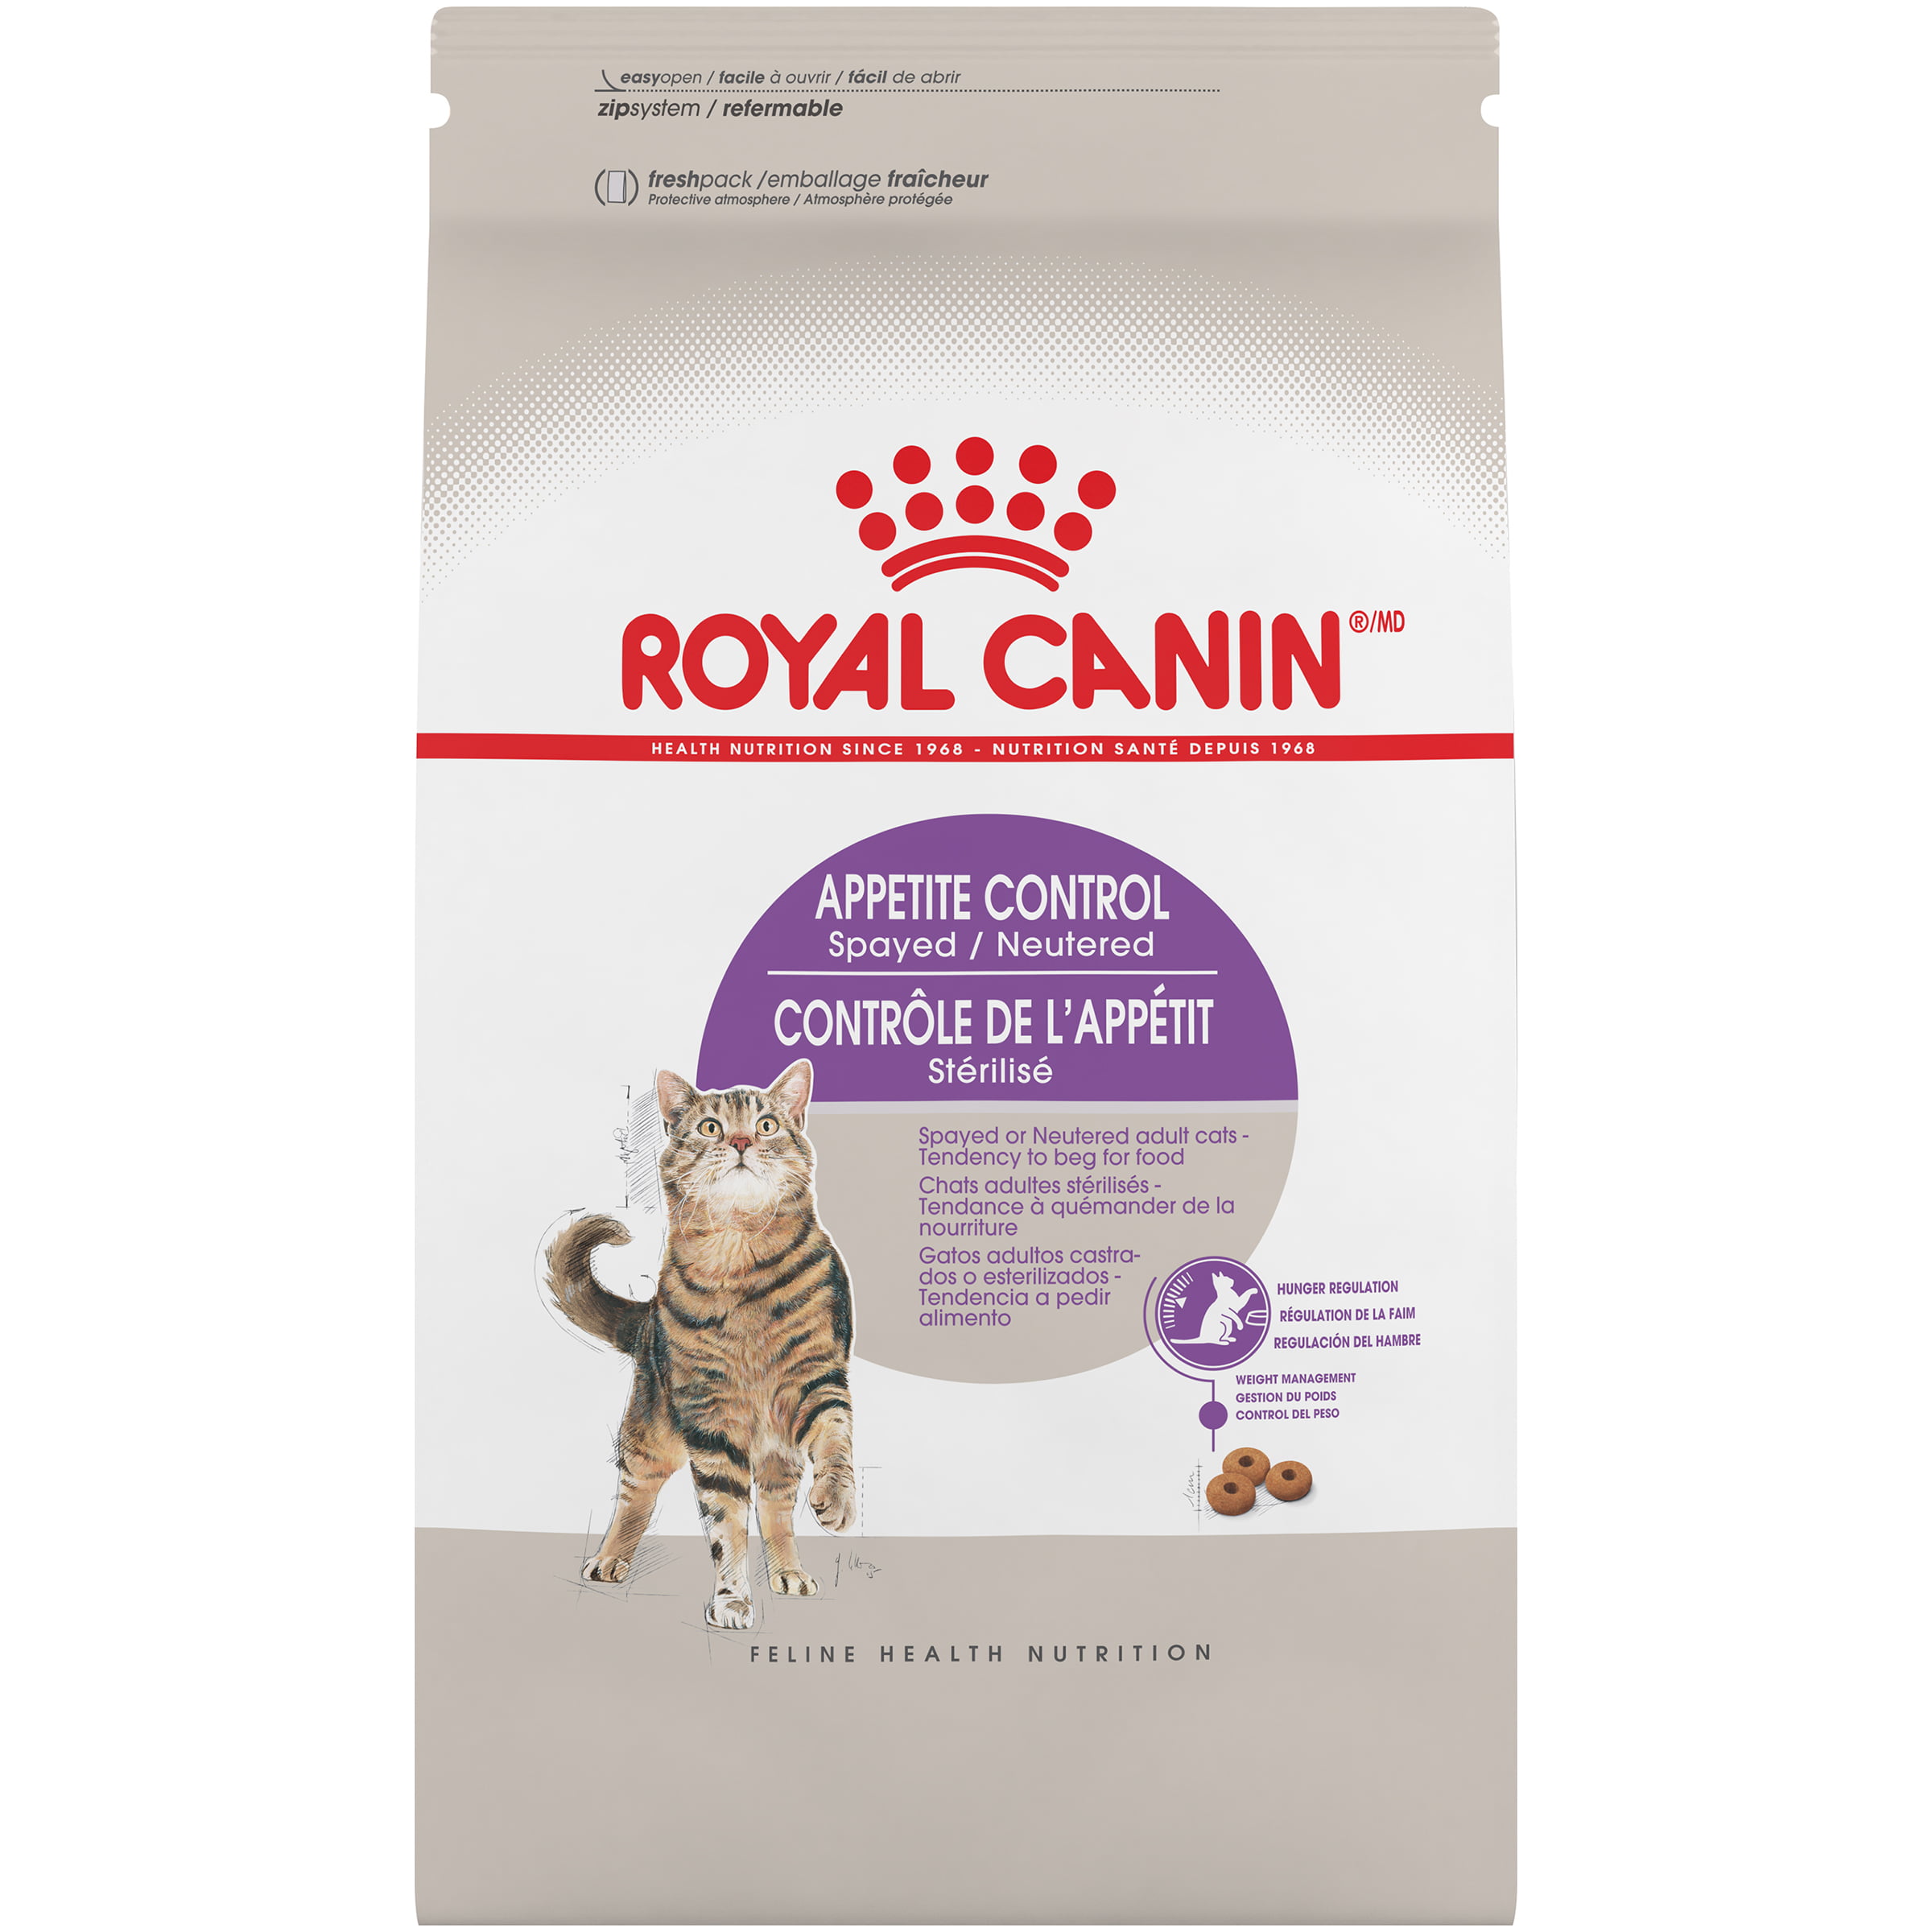 royal canin obesity management cat food